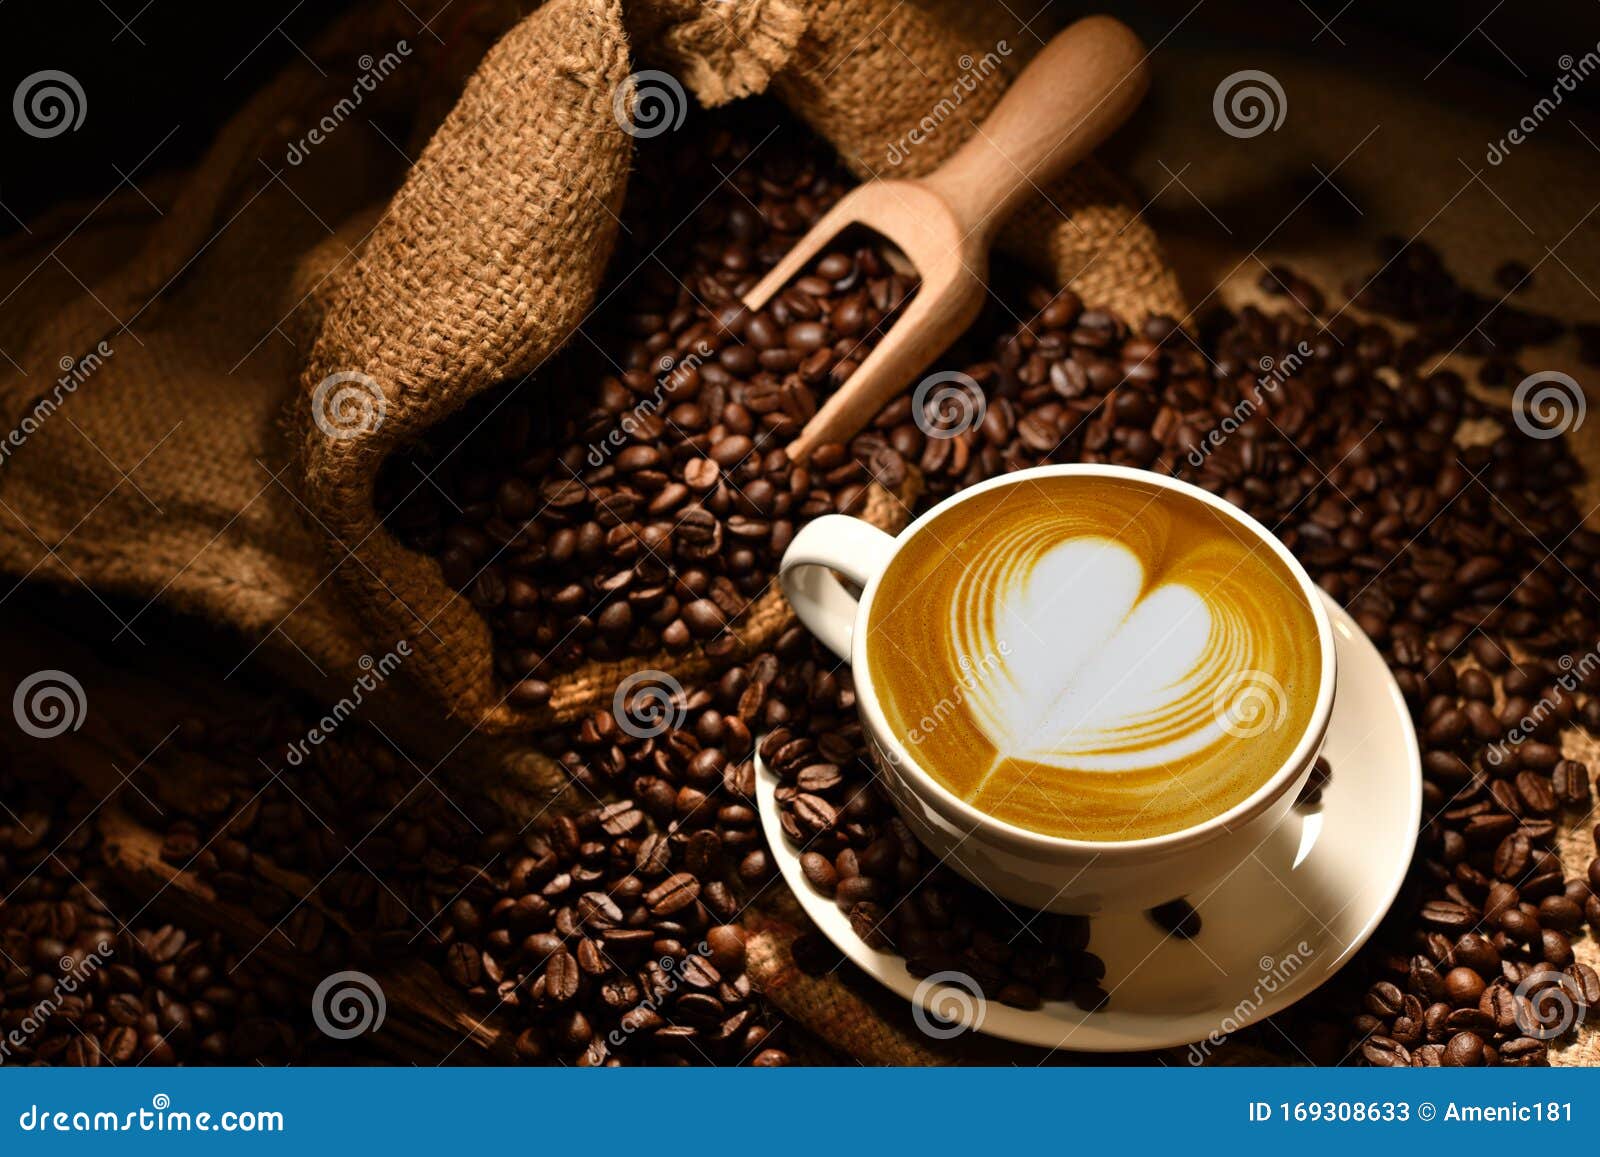 cup of coffee latte with heart  and coffee beans on old wooden background